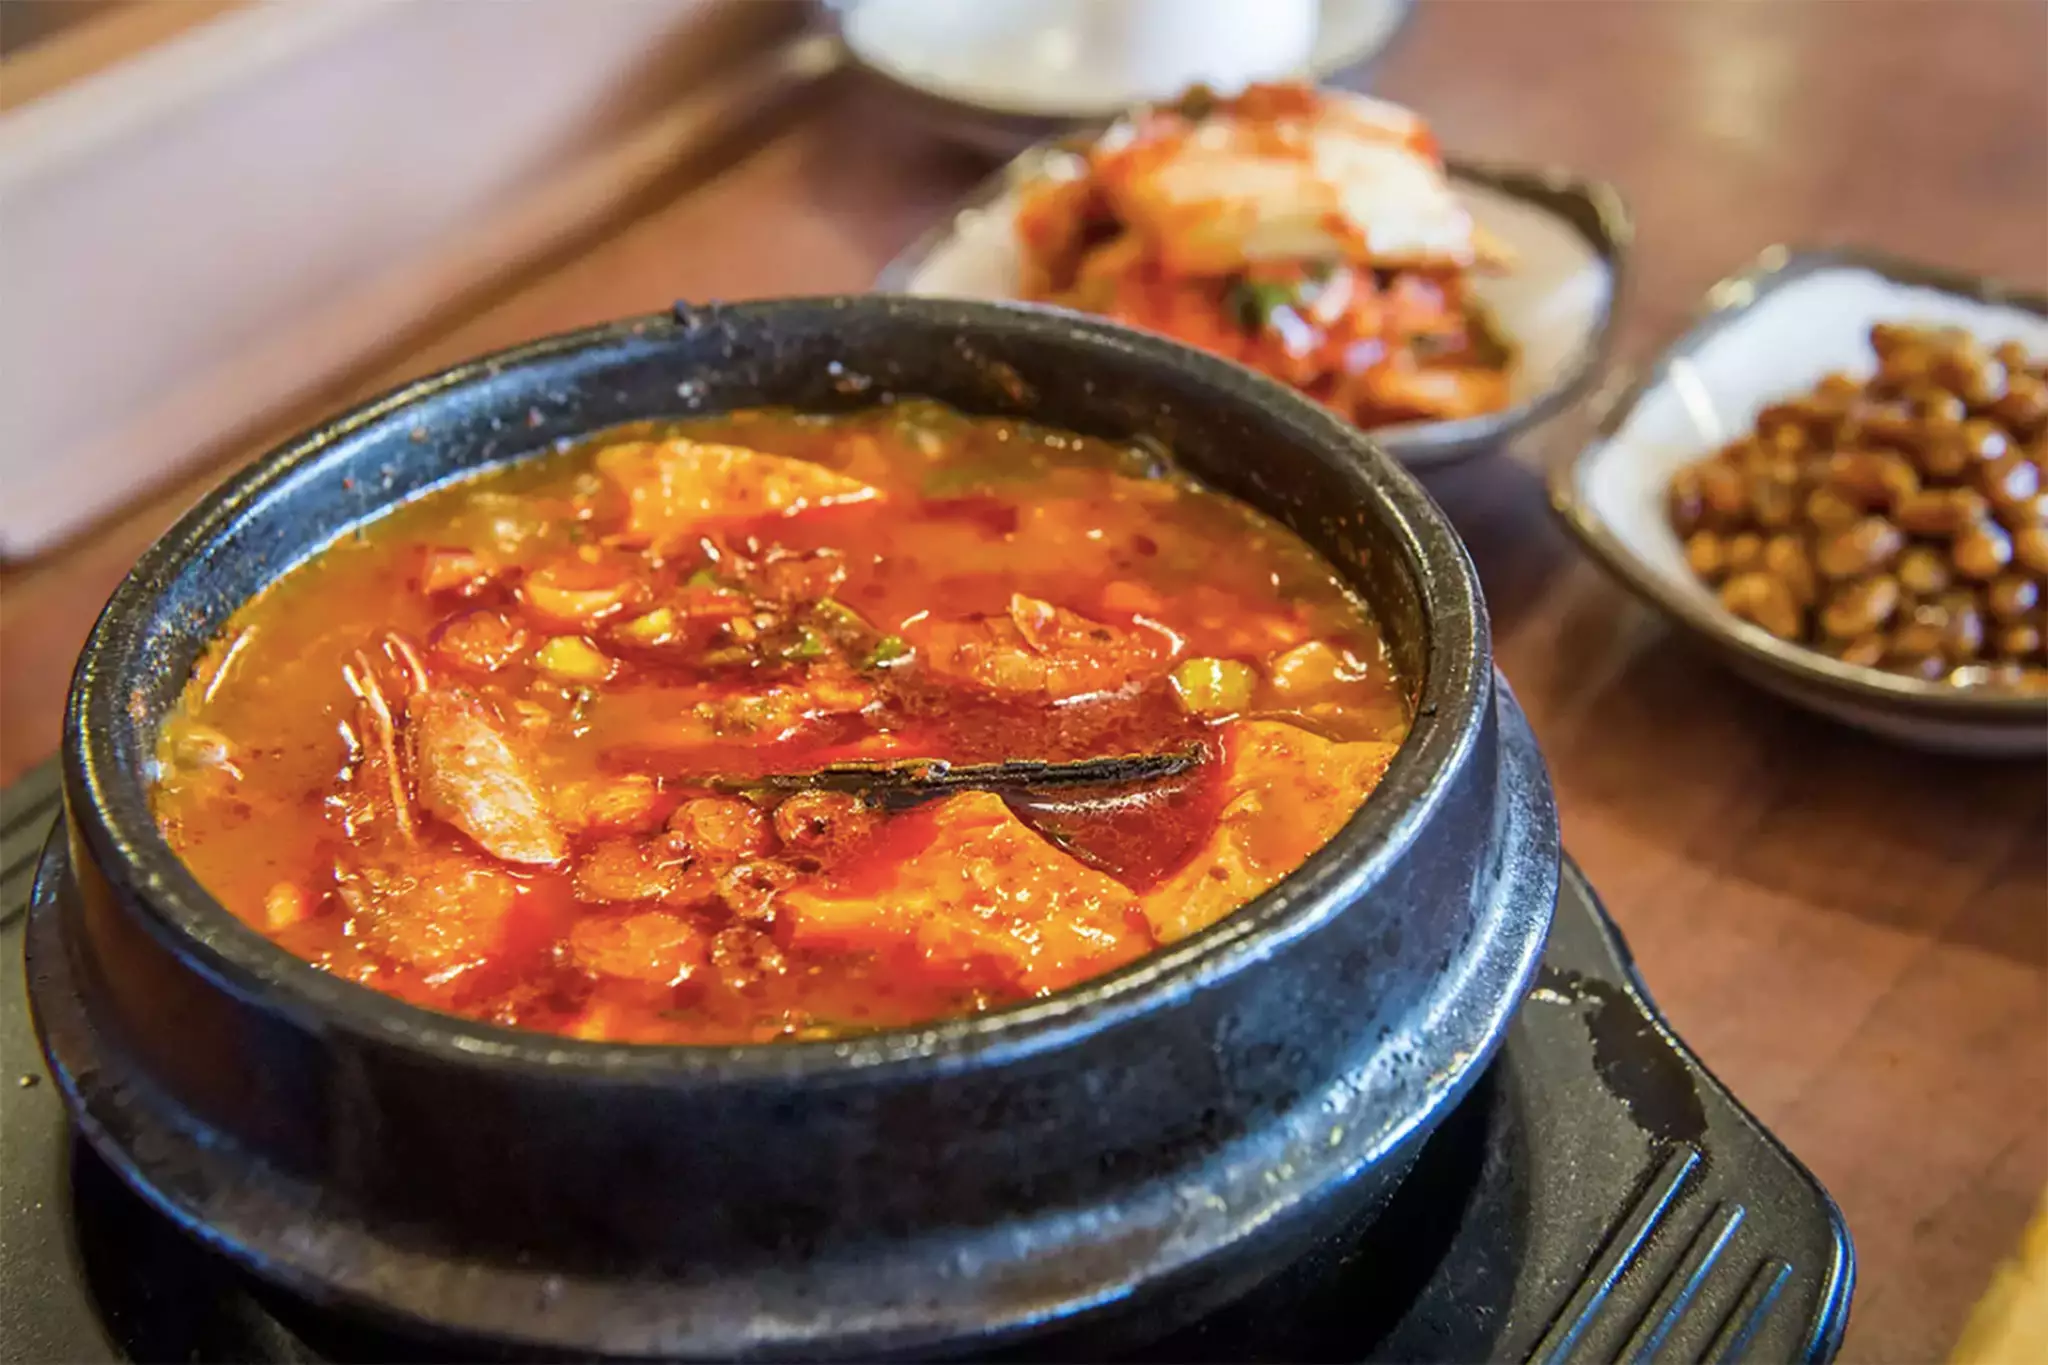 Some highly-ranked Koreatown Restaurants